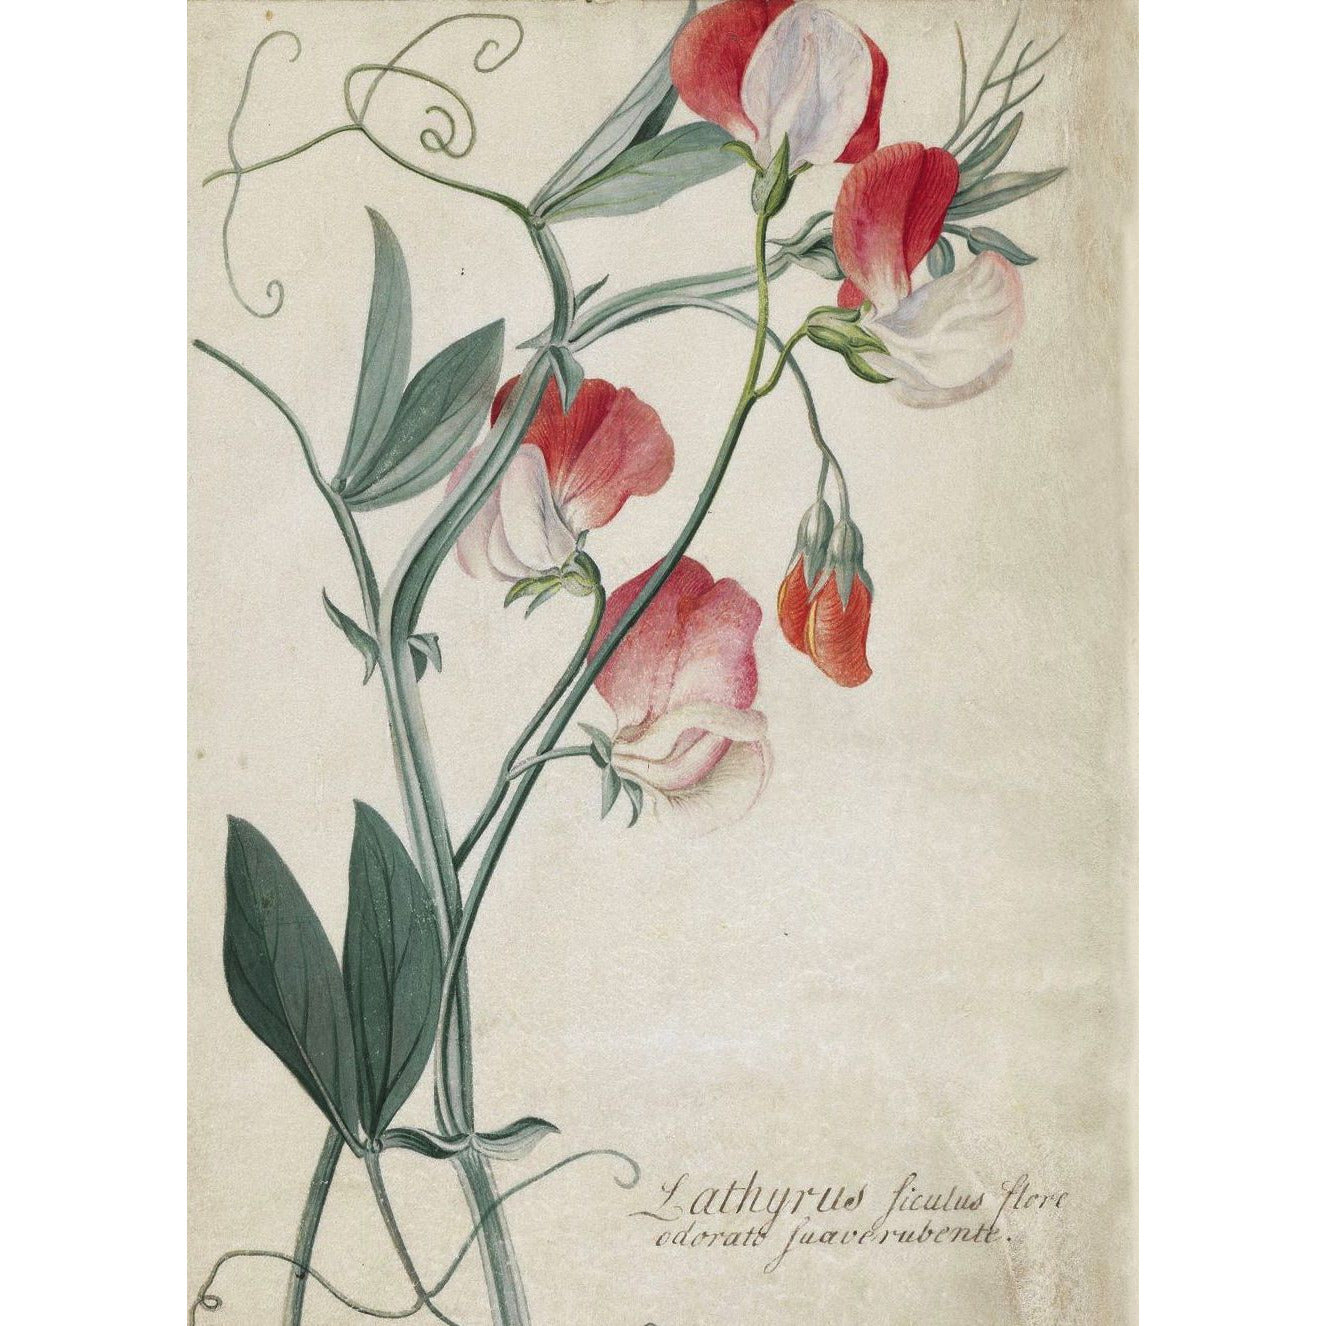 Greetings card - Lathyrus siculus flore, or sweet pea, by Georg Dionysus Ehret. From the Broughton collection of The Fitzwilliam Museum, brought to you by CuratingCambridge.com